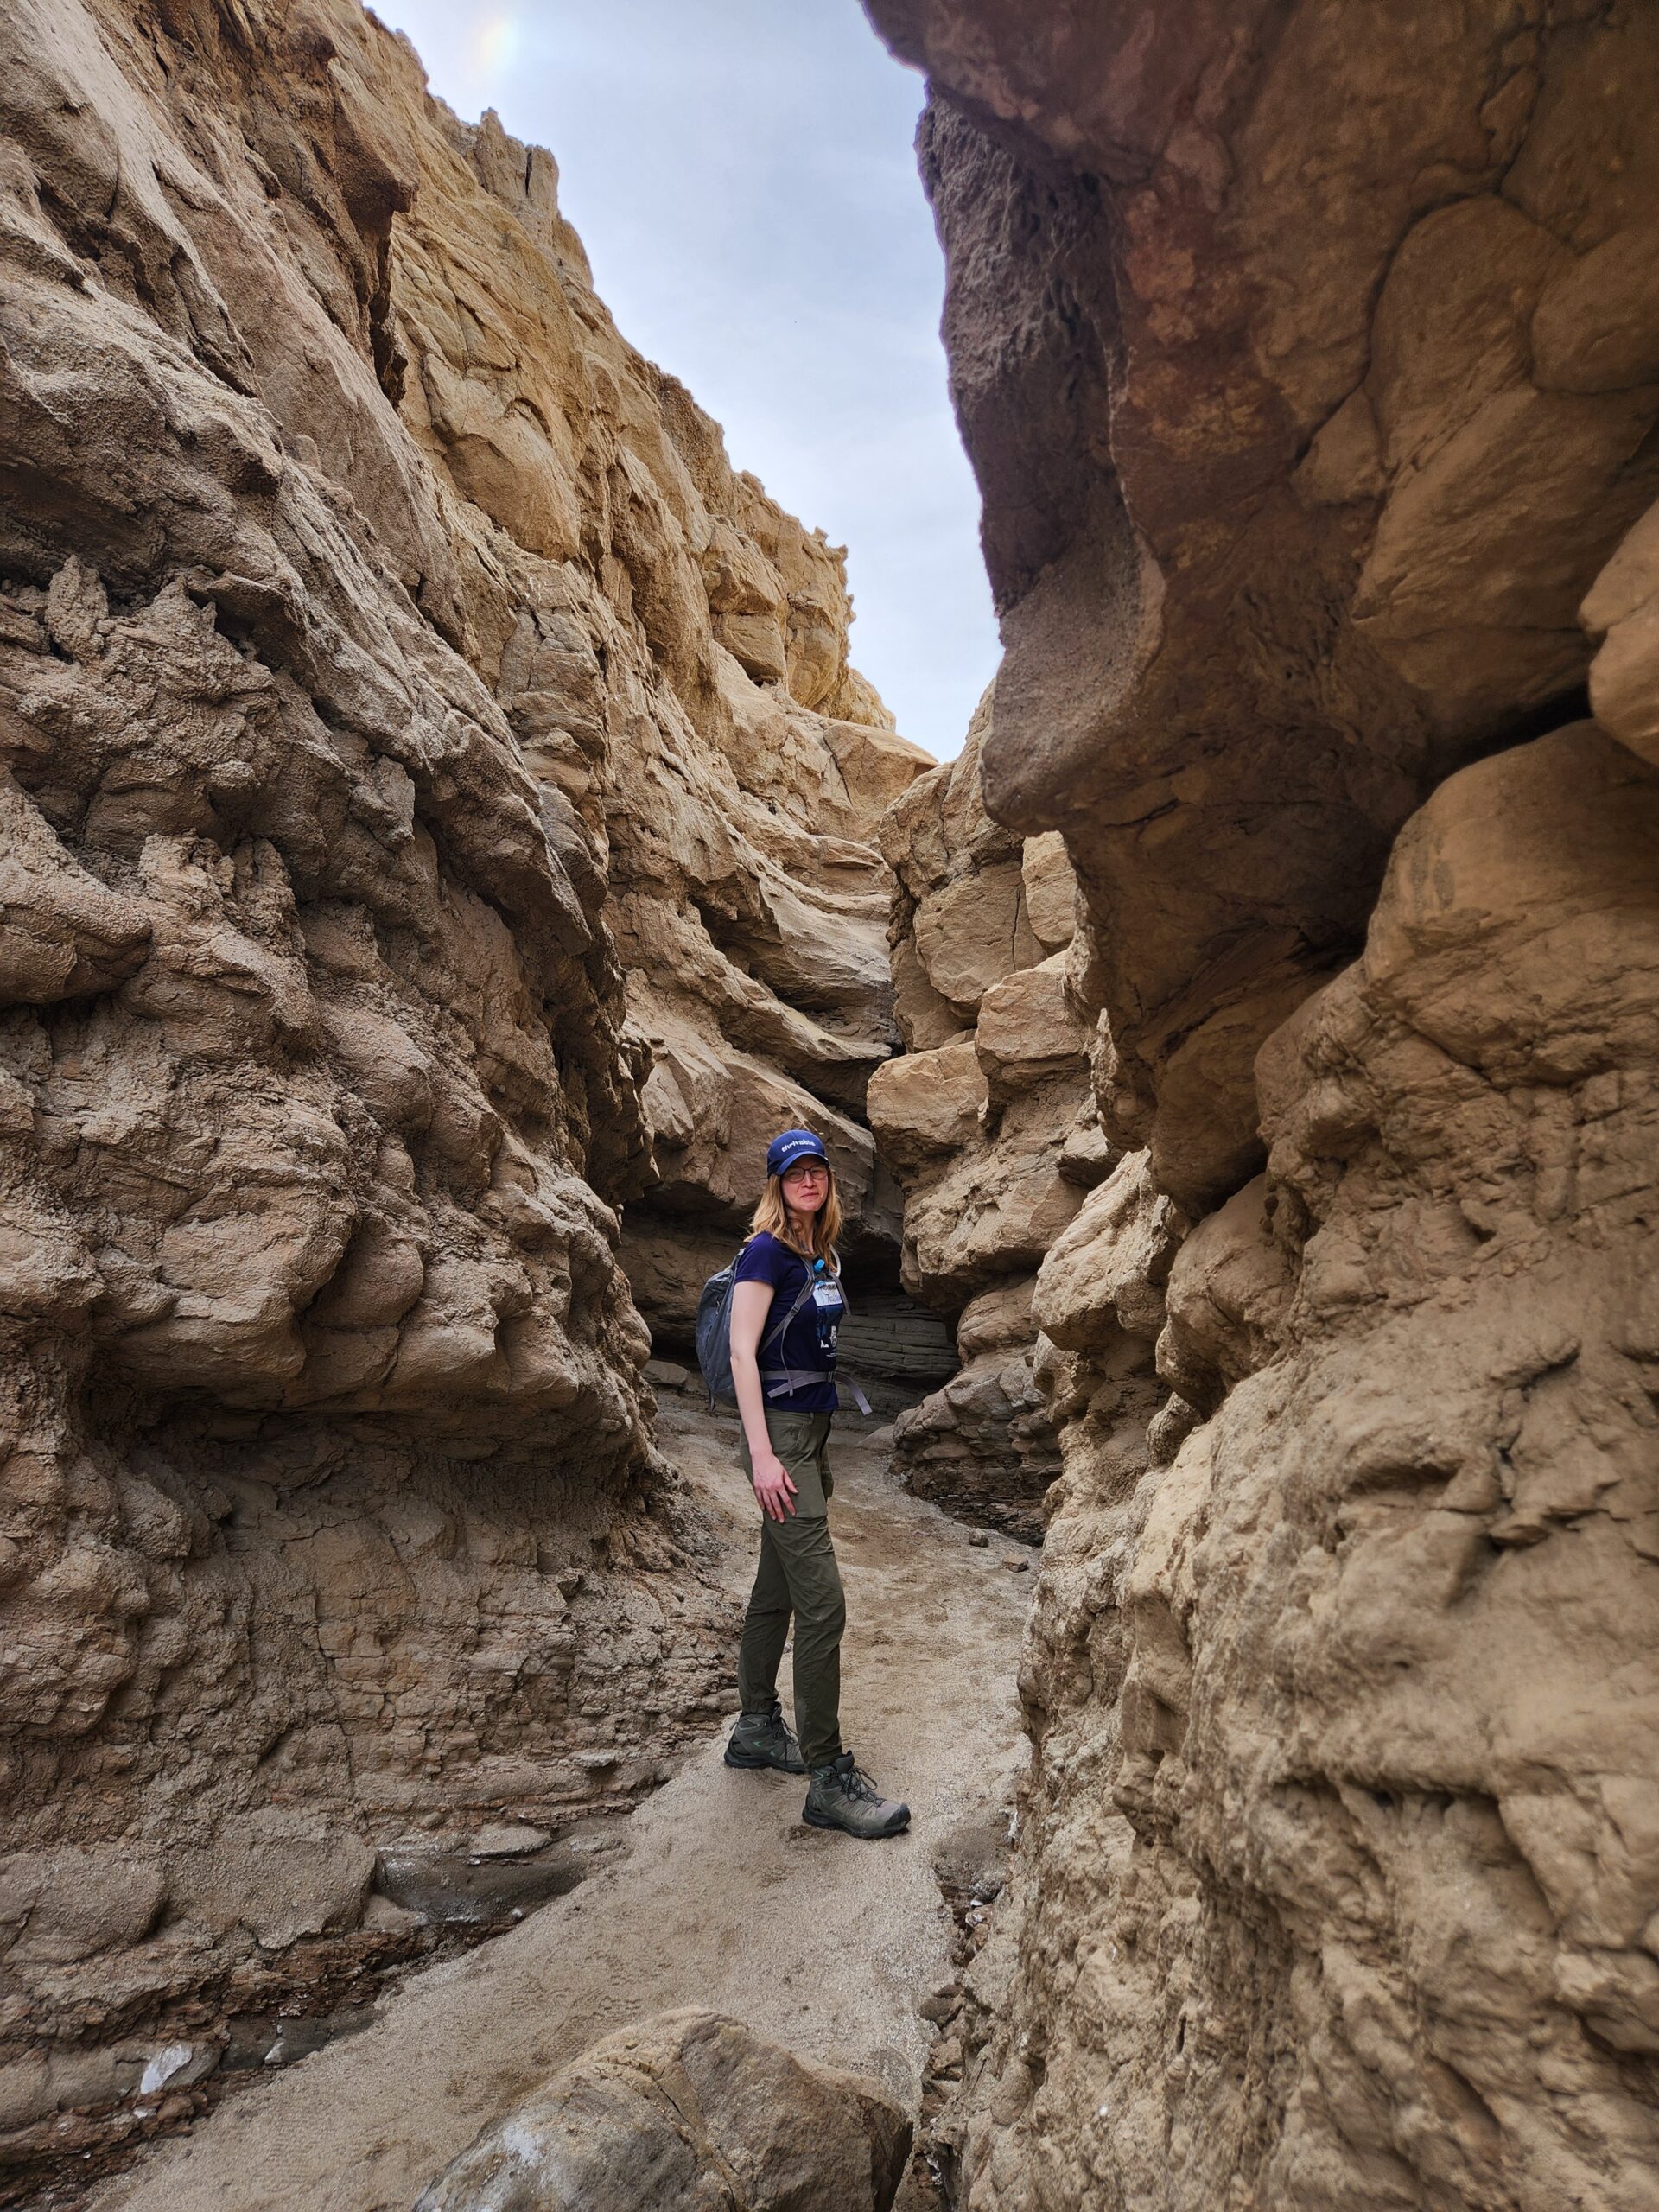 Woman stands in desert slot canyon